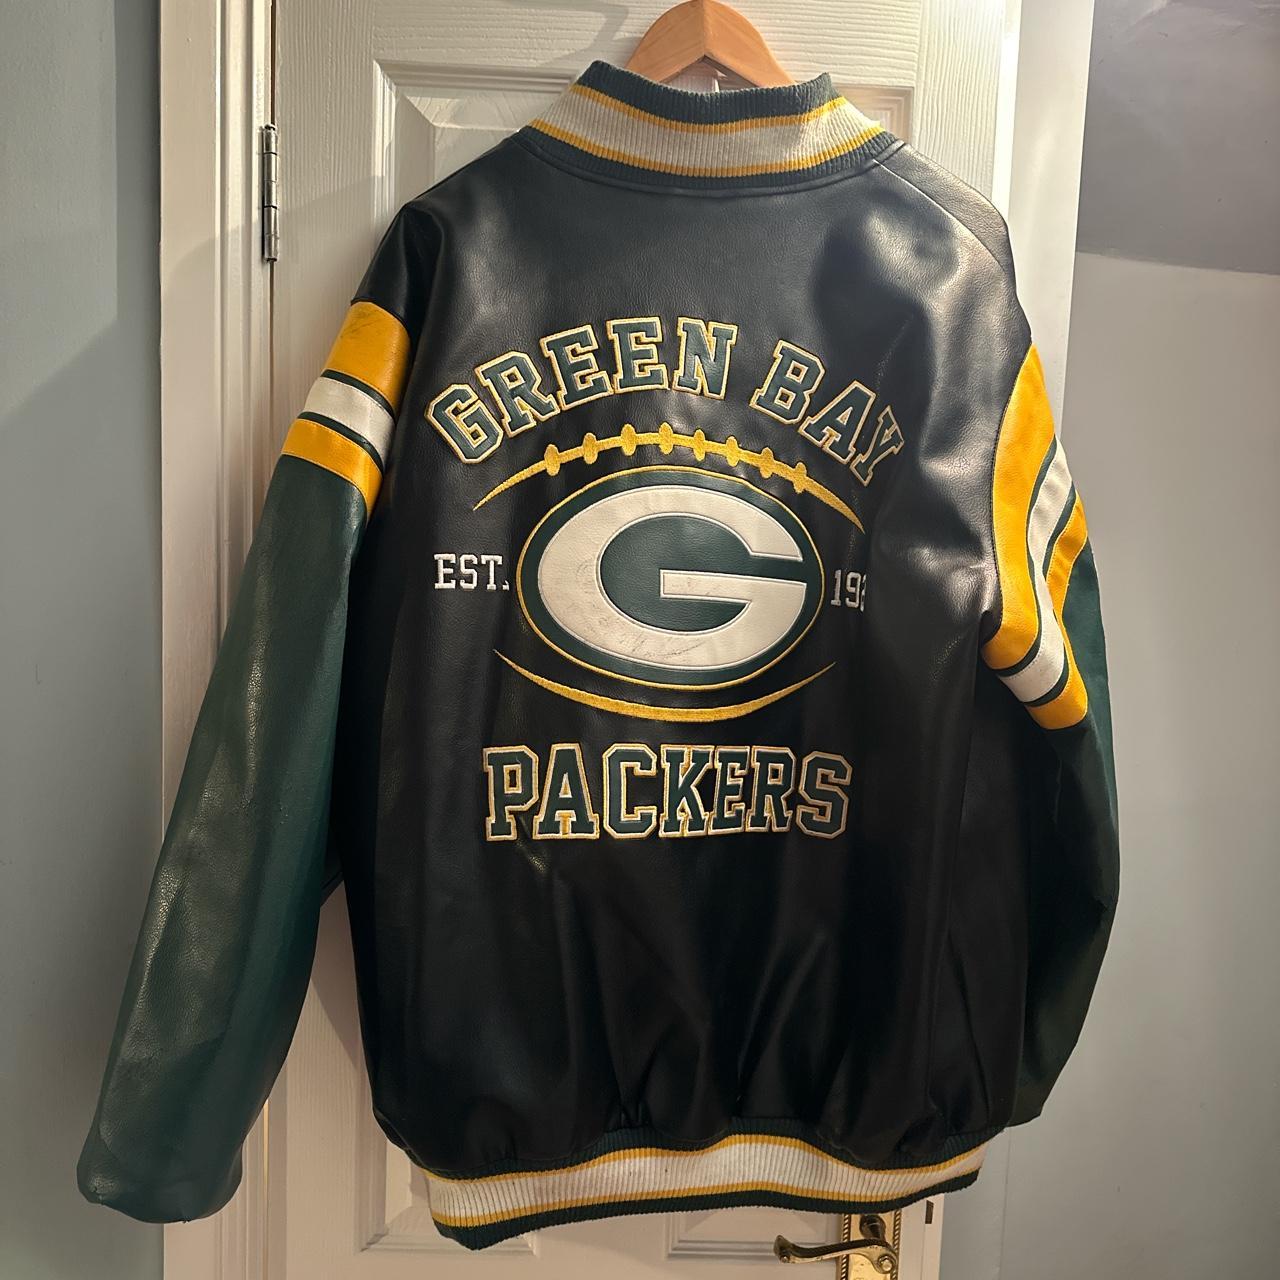 Authentic Green Bay Packers NFL leather varsity